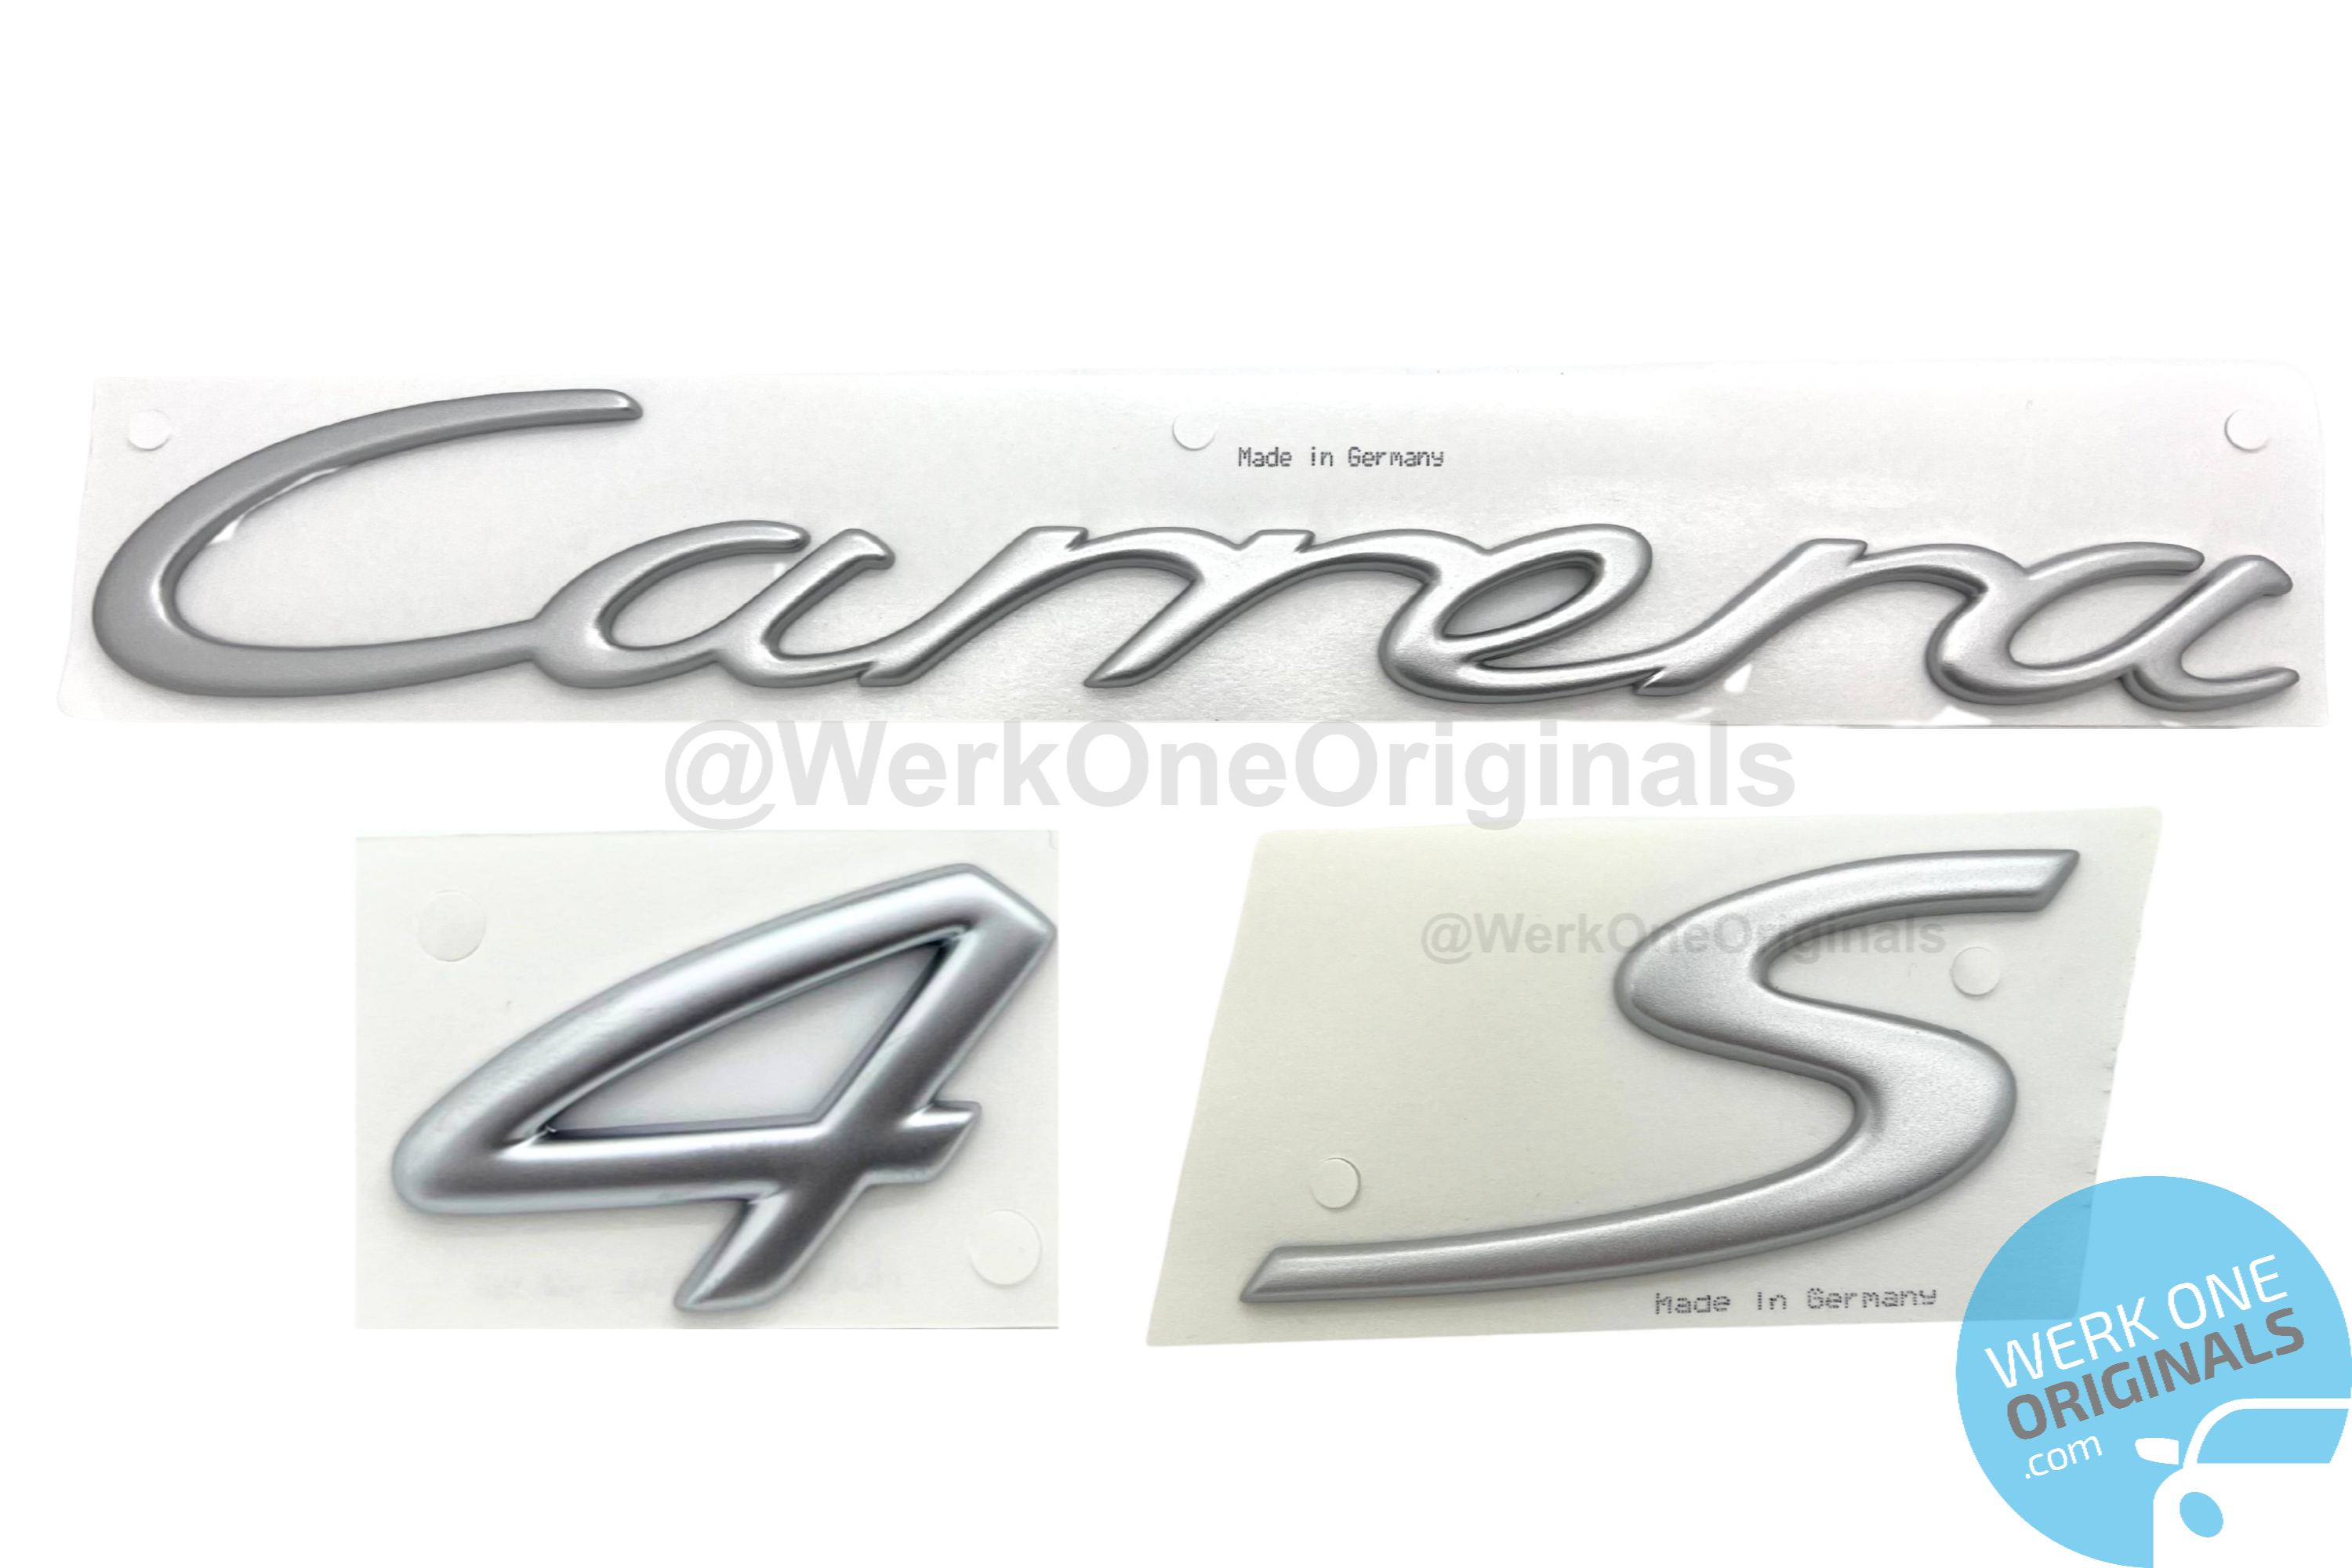 Porsche Official 'Carrera 4S' Rear Badge in Matte Silver for 911 Type 997 Carrera 4S Models